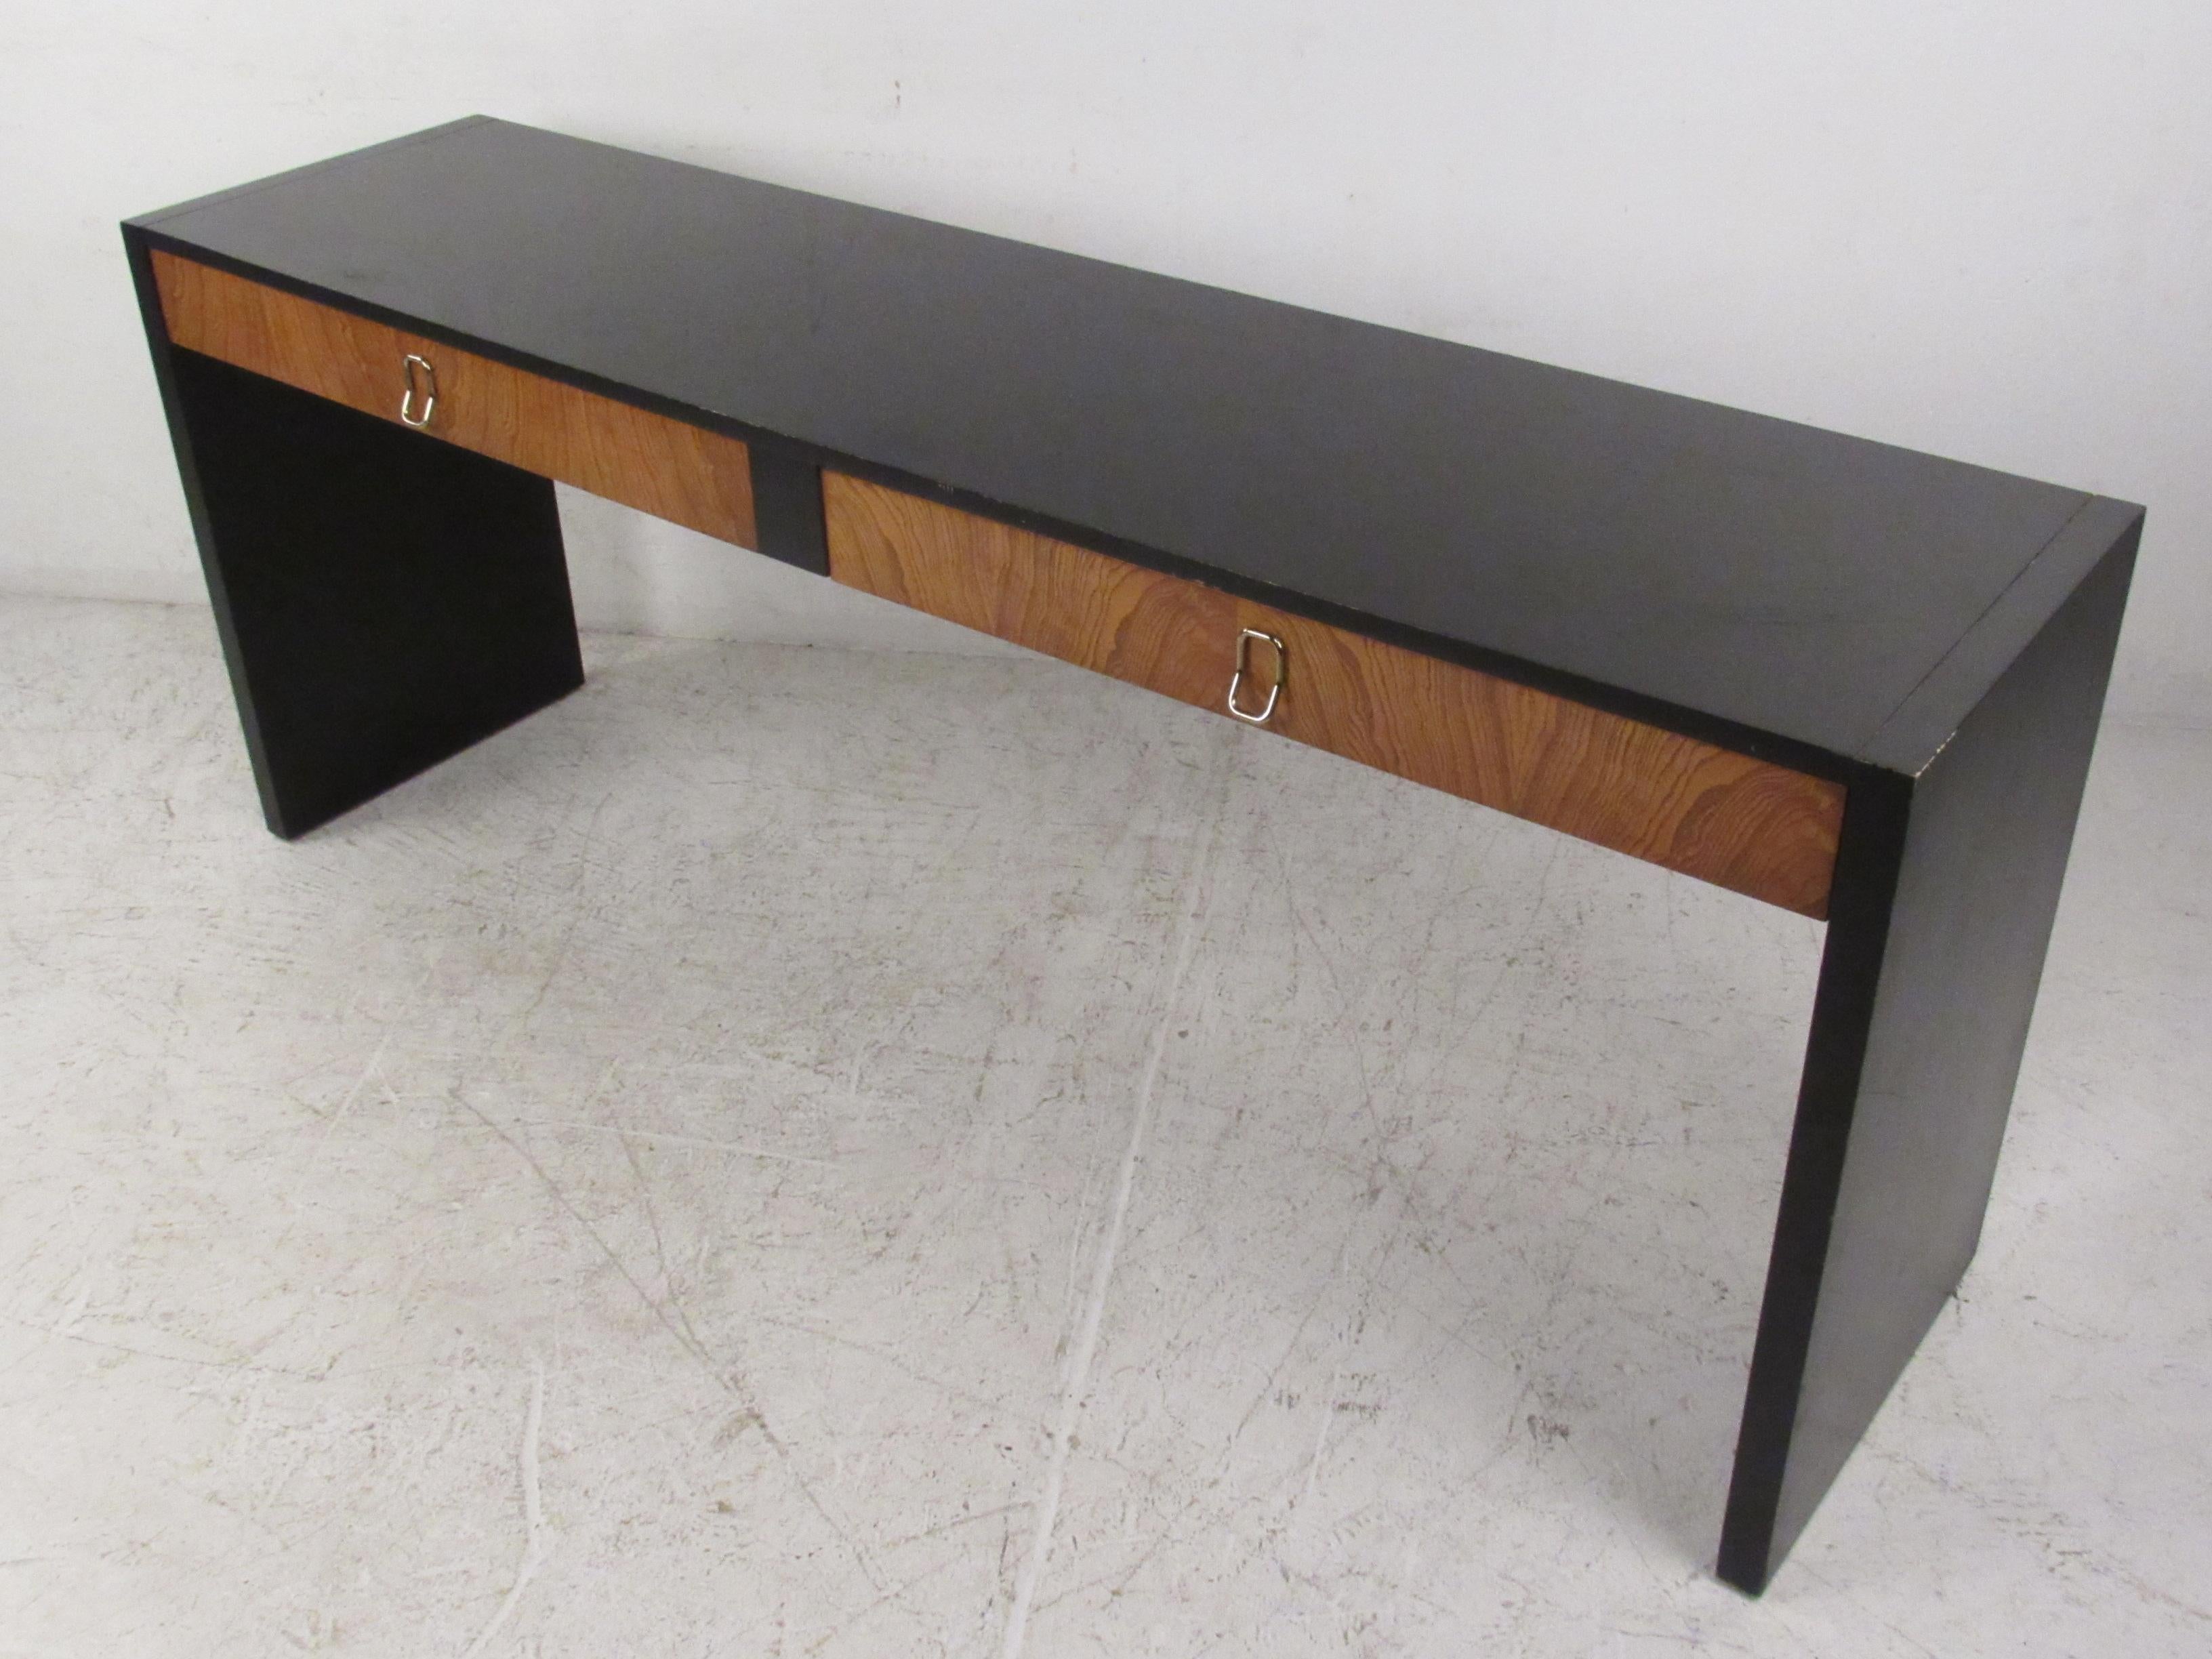 This stunning vintage modern hall table features two large drawers with unusual metal pulls. A lovely two-tone design that is sure to make a lasting impression in any setting. This versatile mid-century piece functions as a vanity, a desk, or a